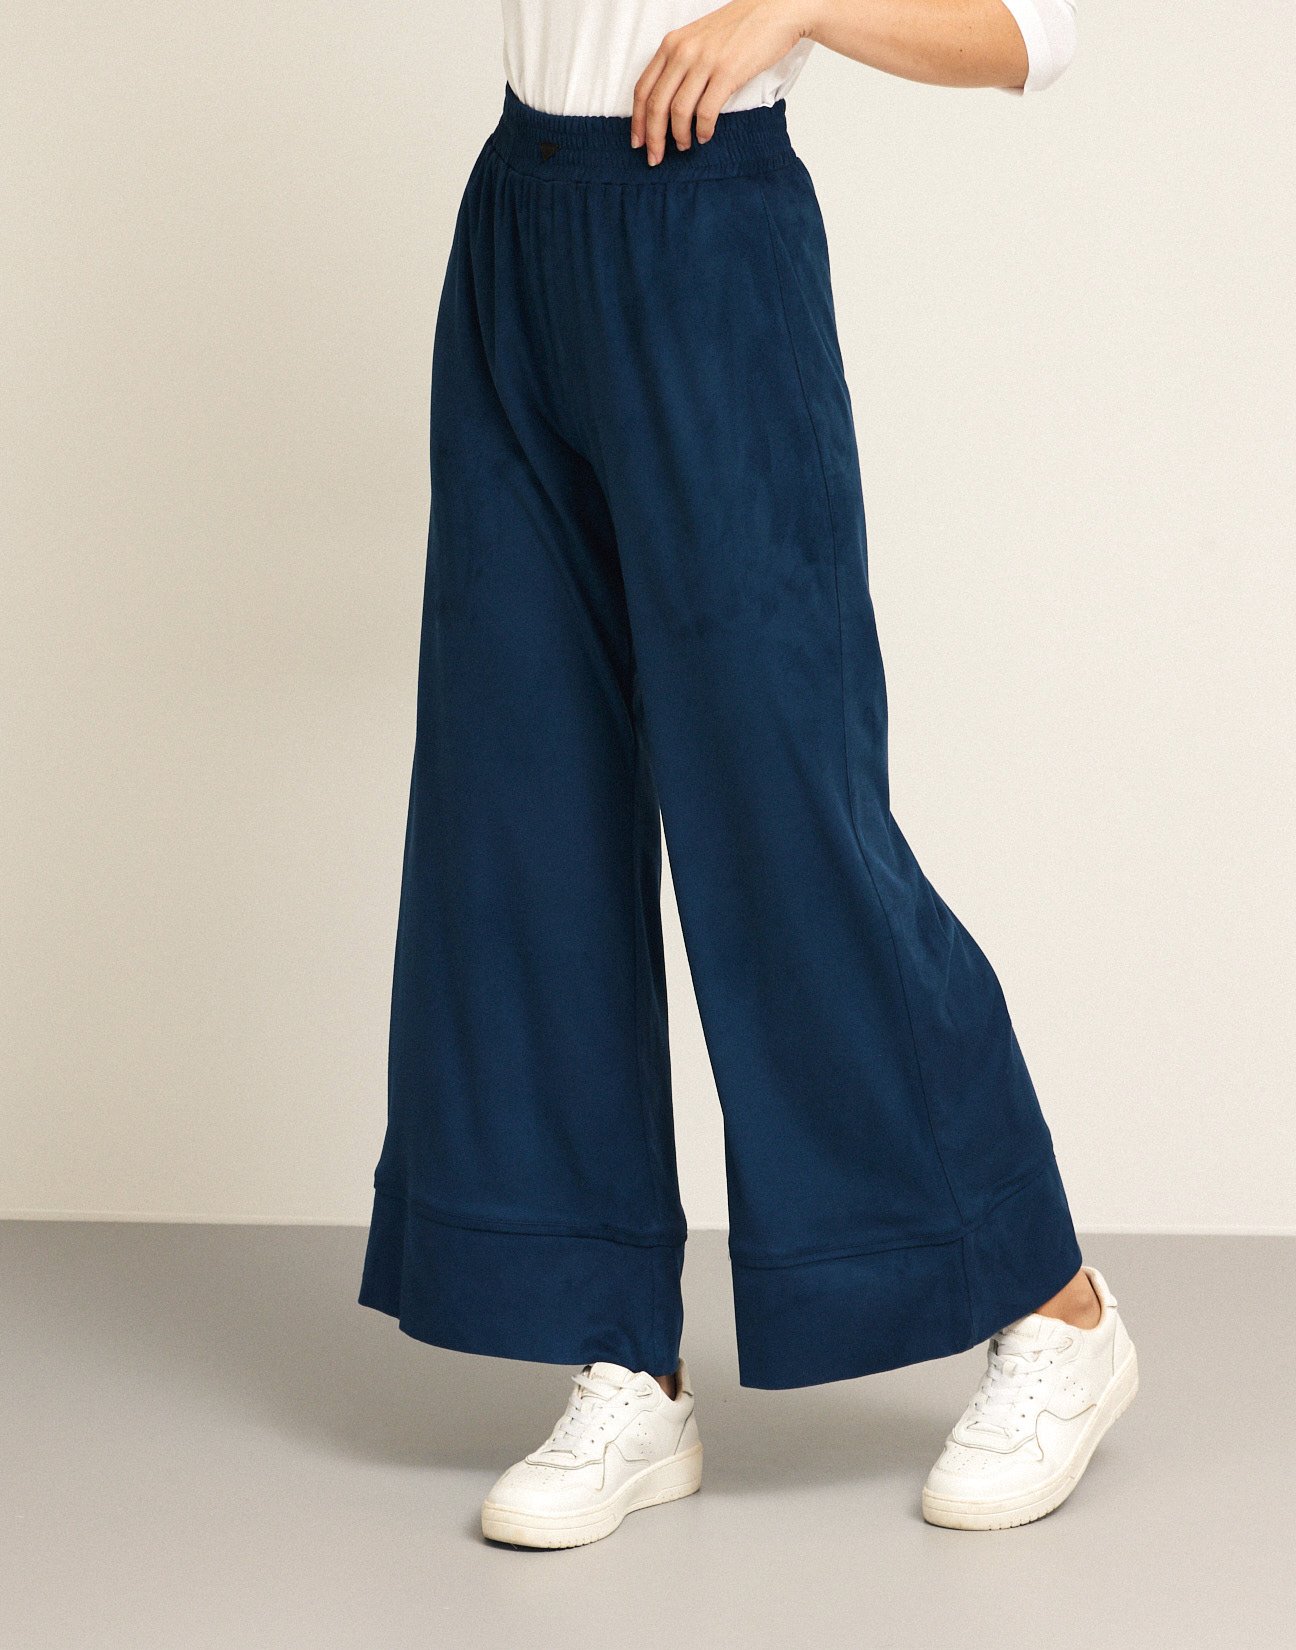 Faux suede trousers